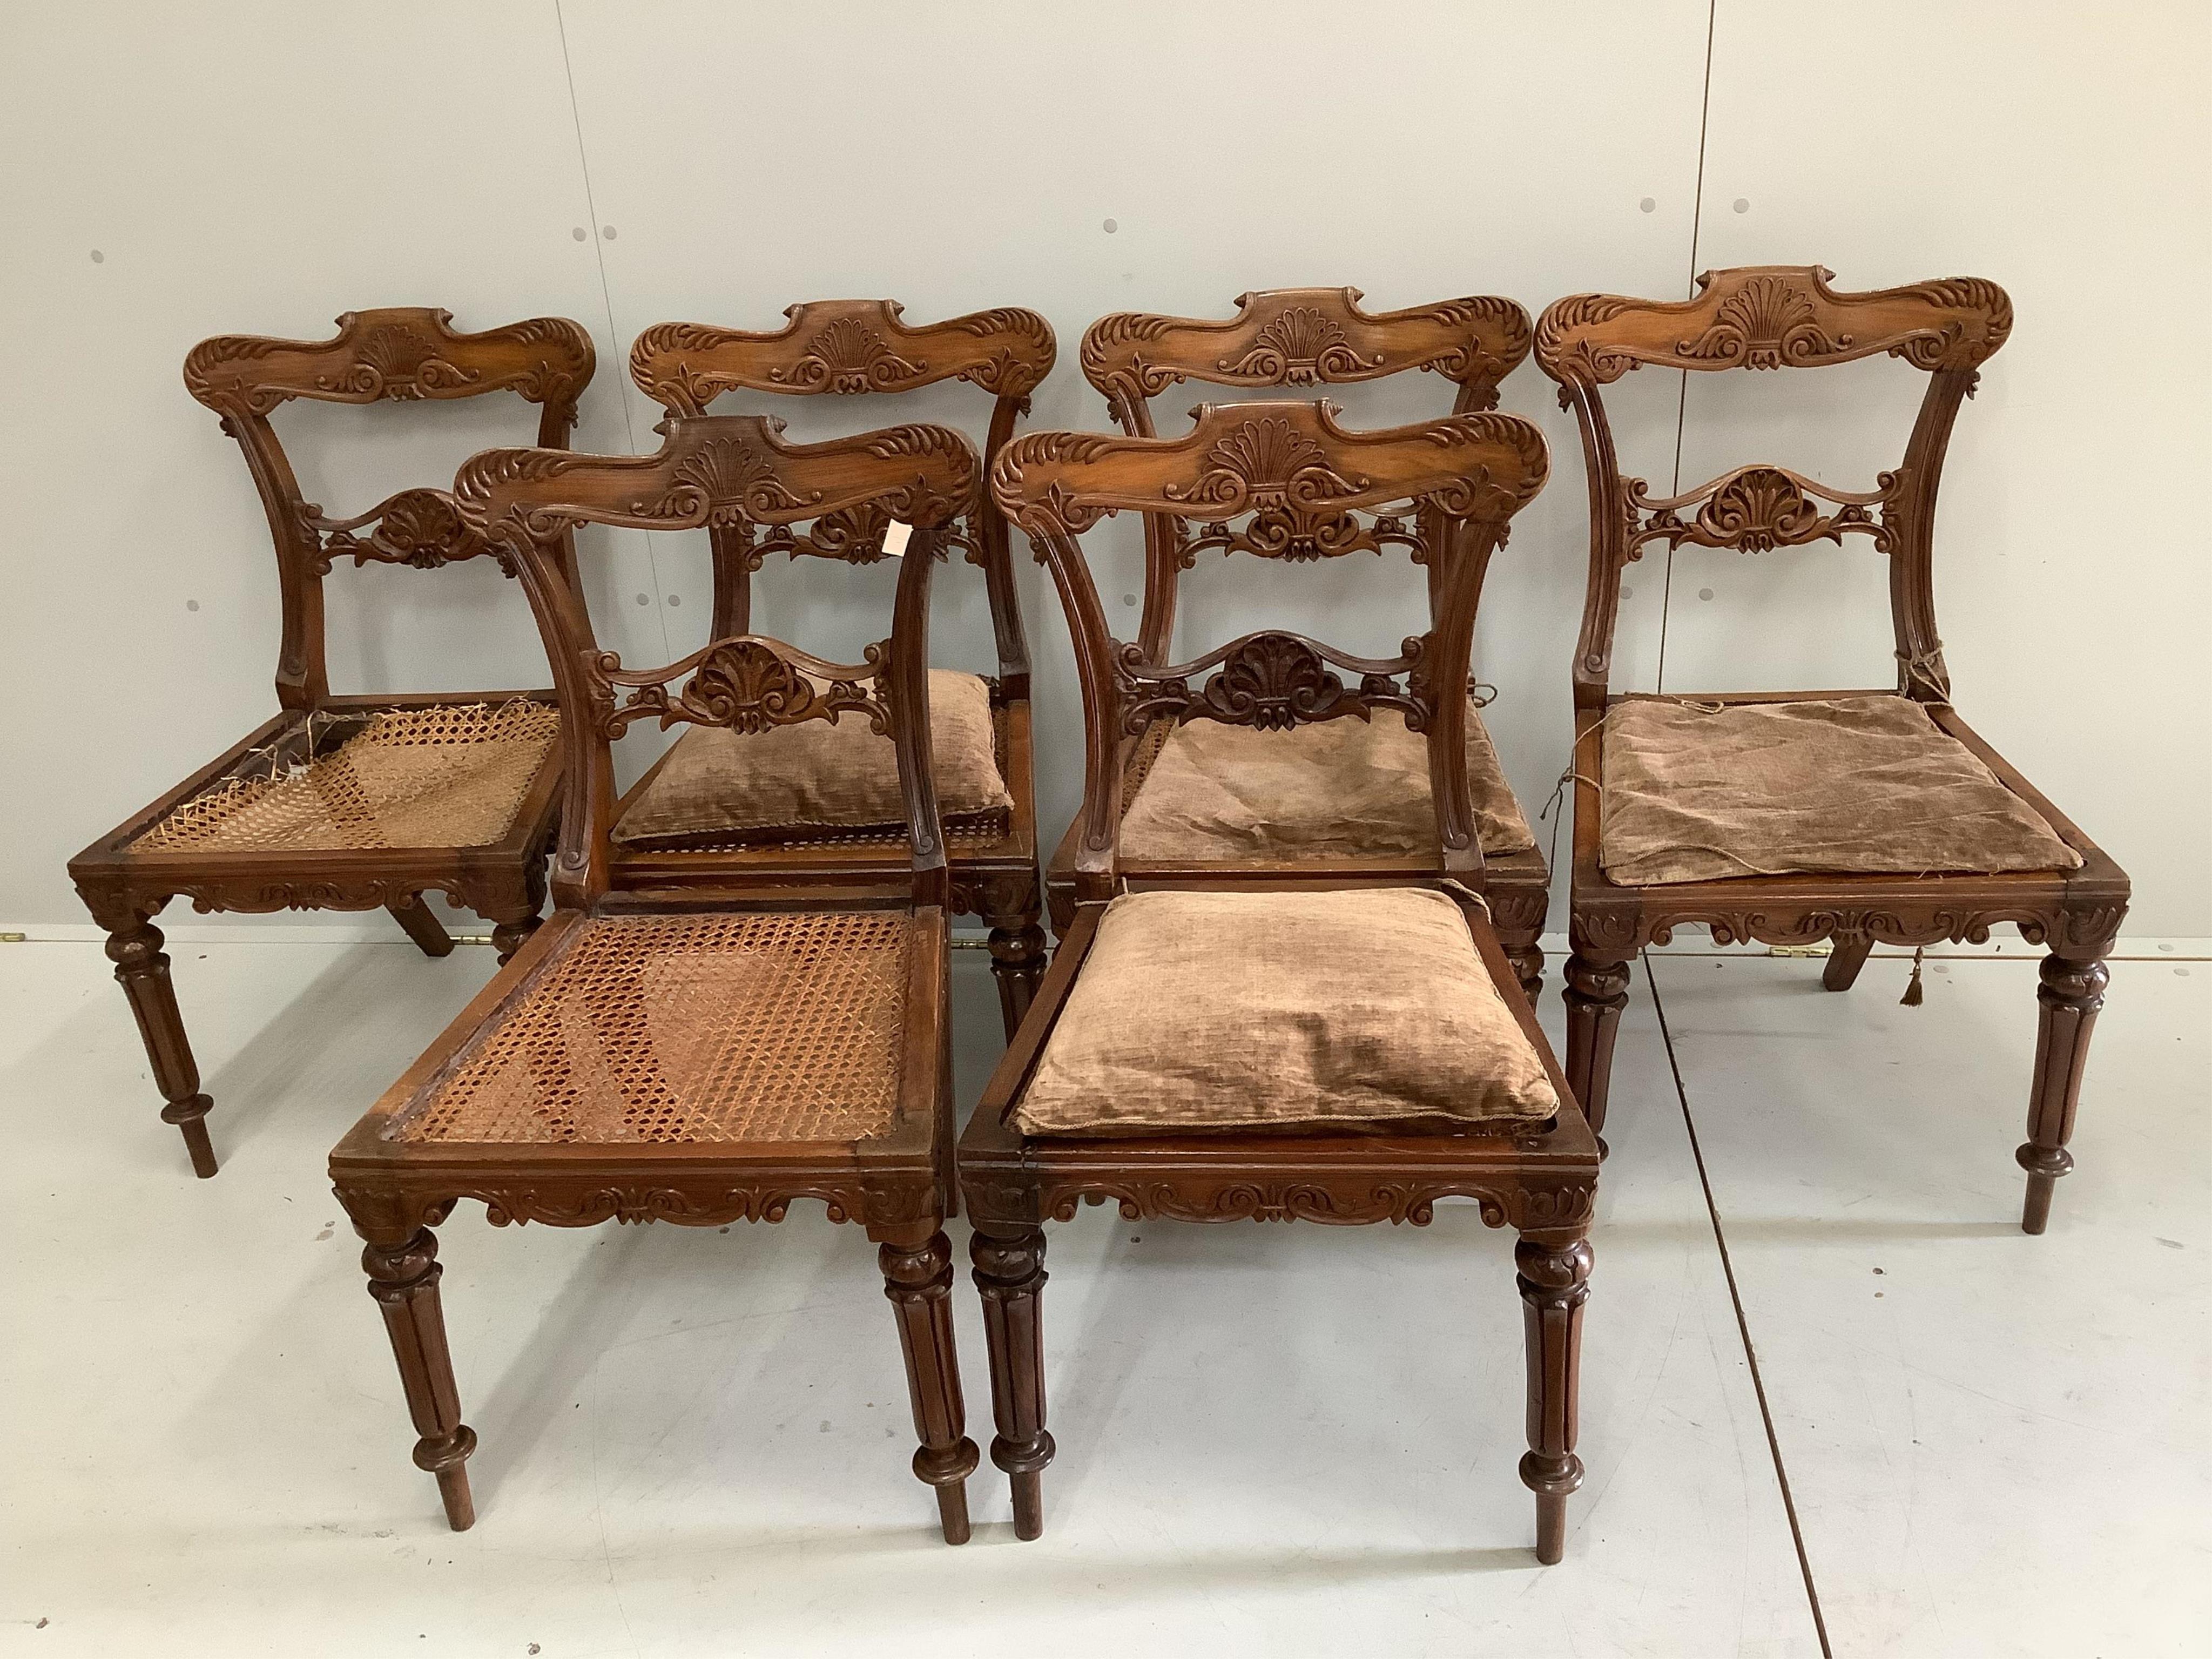 A set of six 19th century Gillows style dining chairs. Condition - fair, one cane seat in need of repair